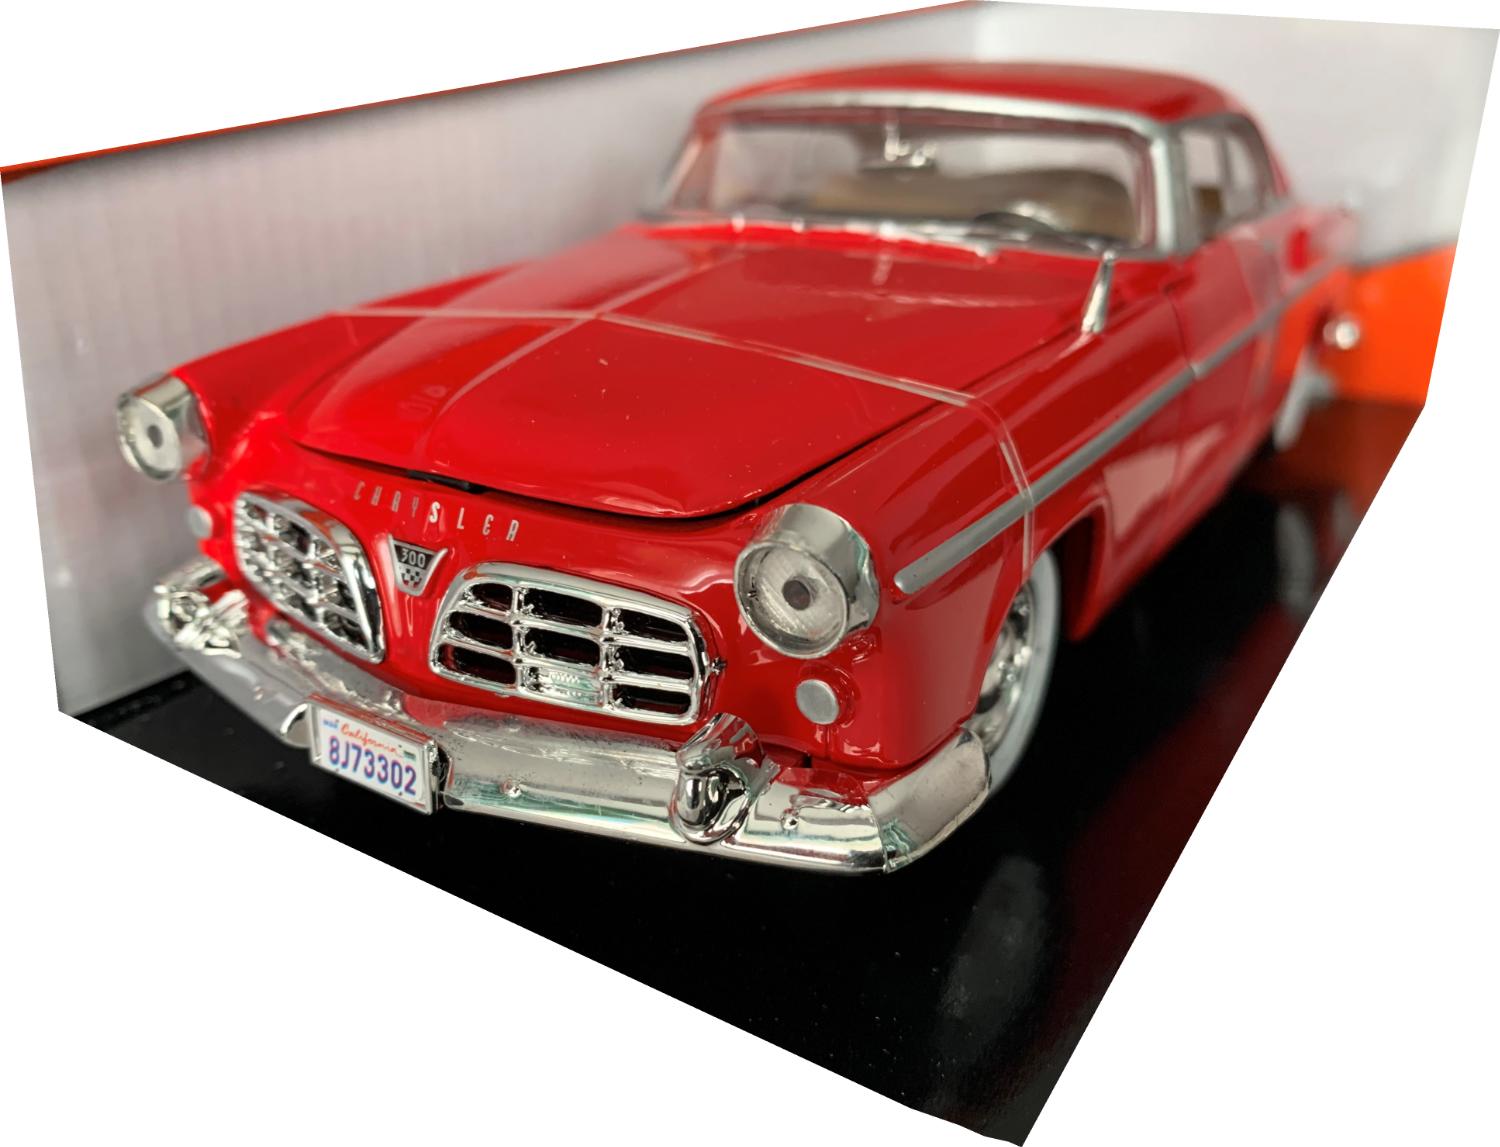 Chrysler C300 1955 in Red 1:24 scale diecast  car model from Motormax